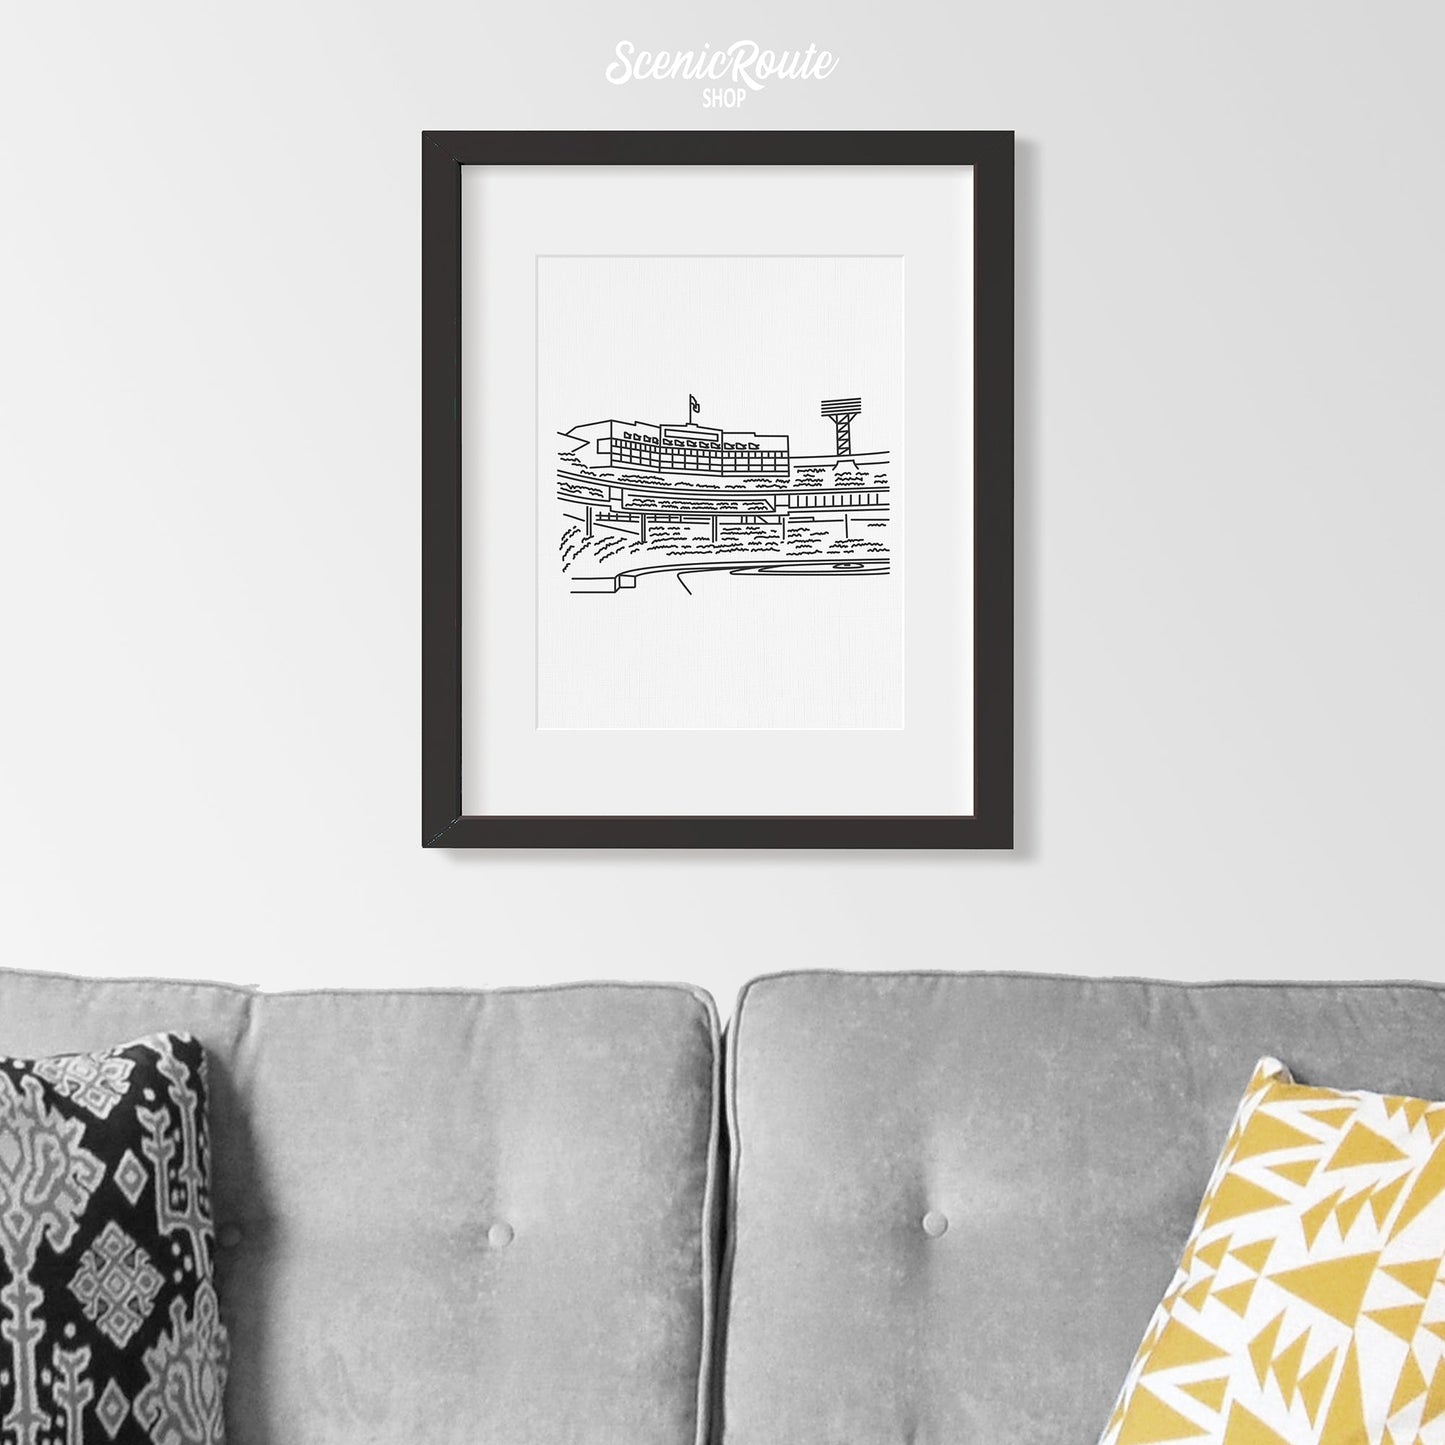 A framed line art drawing of Fenway Park hanging above a couch